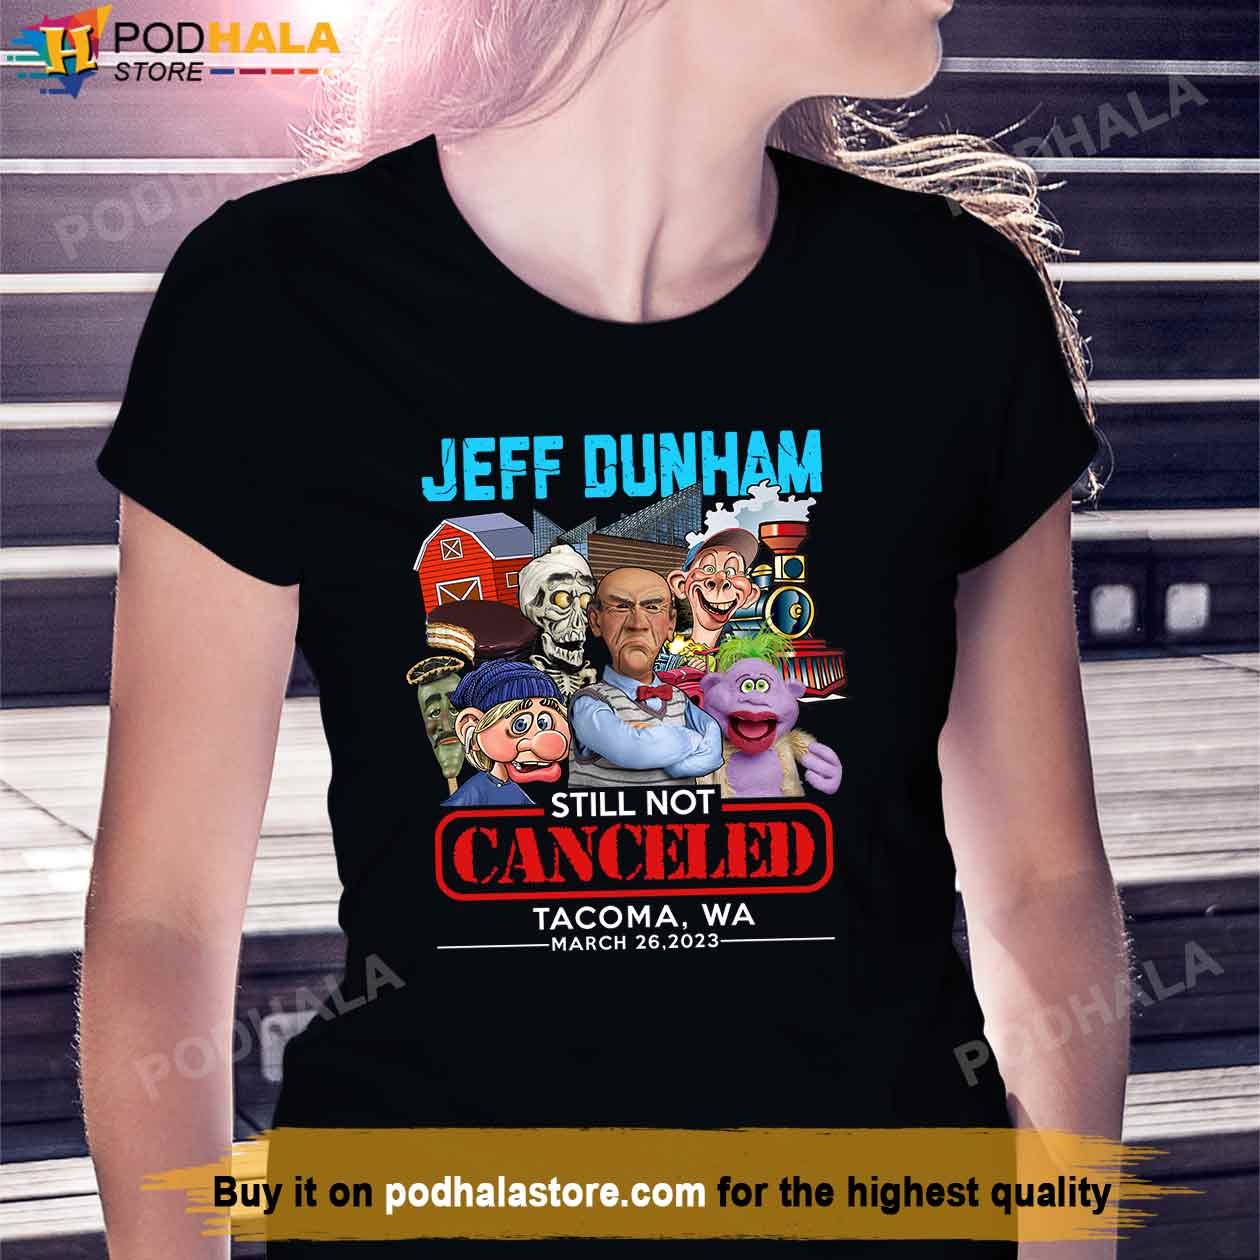 Dunham Tacoma, WA (March 26,2023) Shirt, Gift For Jeff Dunham Fans - Bring Your Ideas, Thoughts And Imaginations Into Reality Today